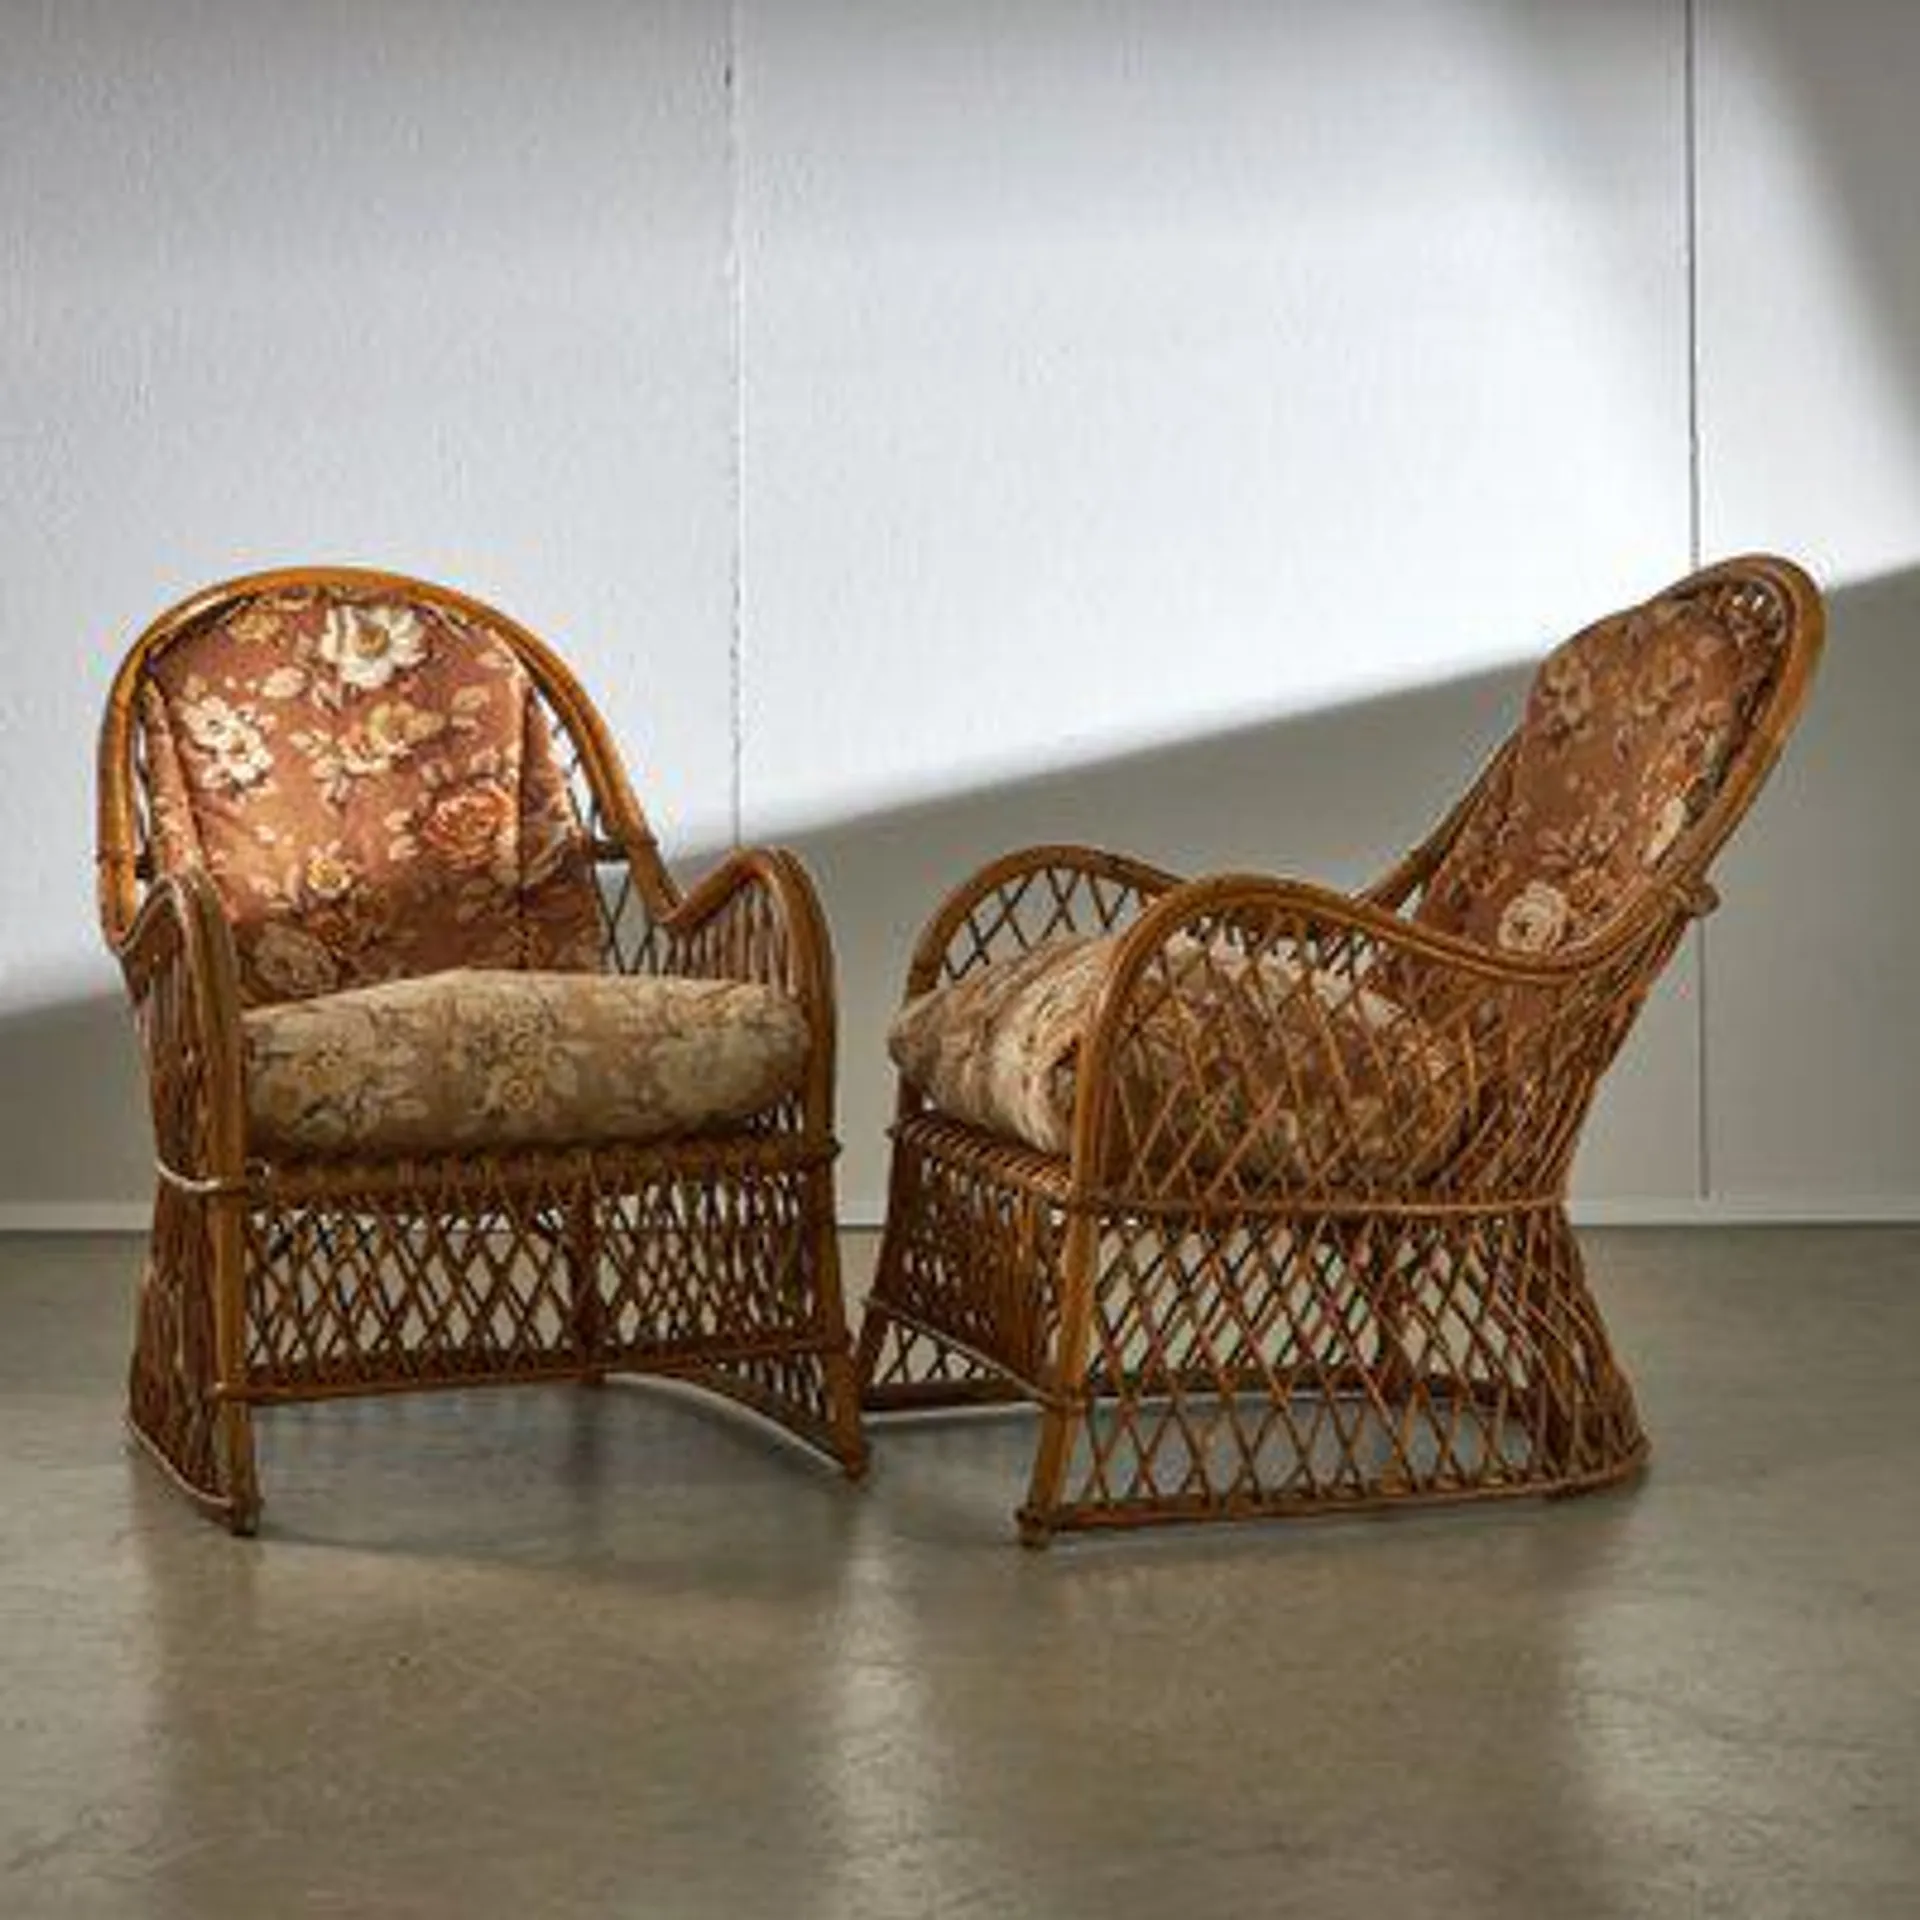 Italian Rattan Armchair with Rounded Arms and Cushions, 1960s